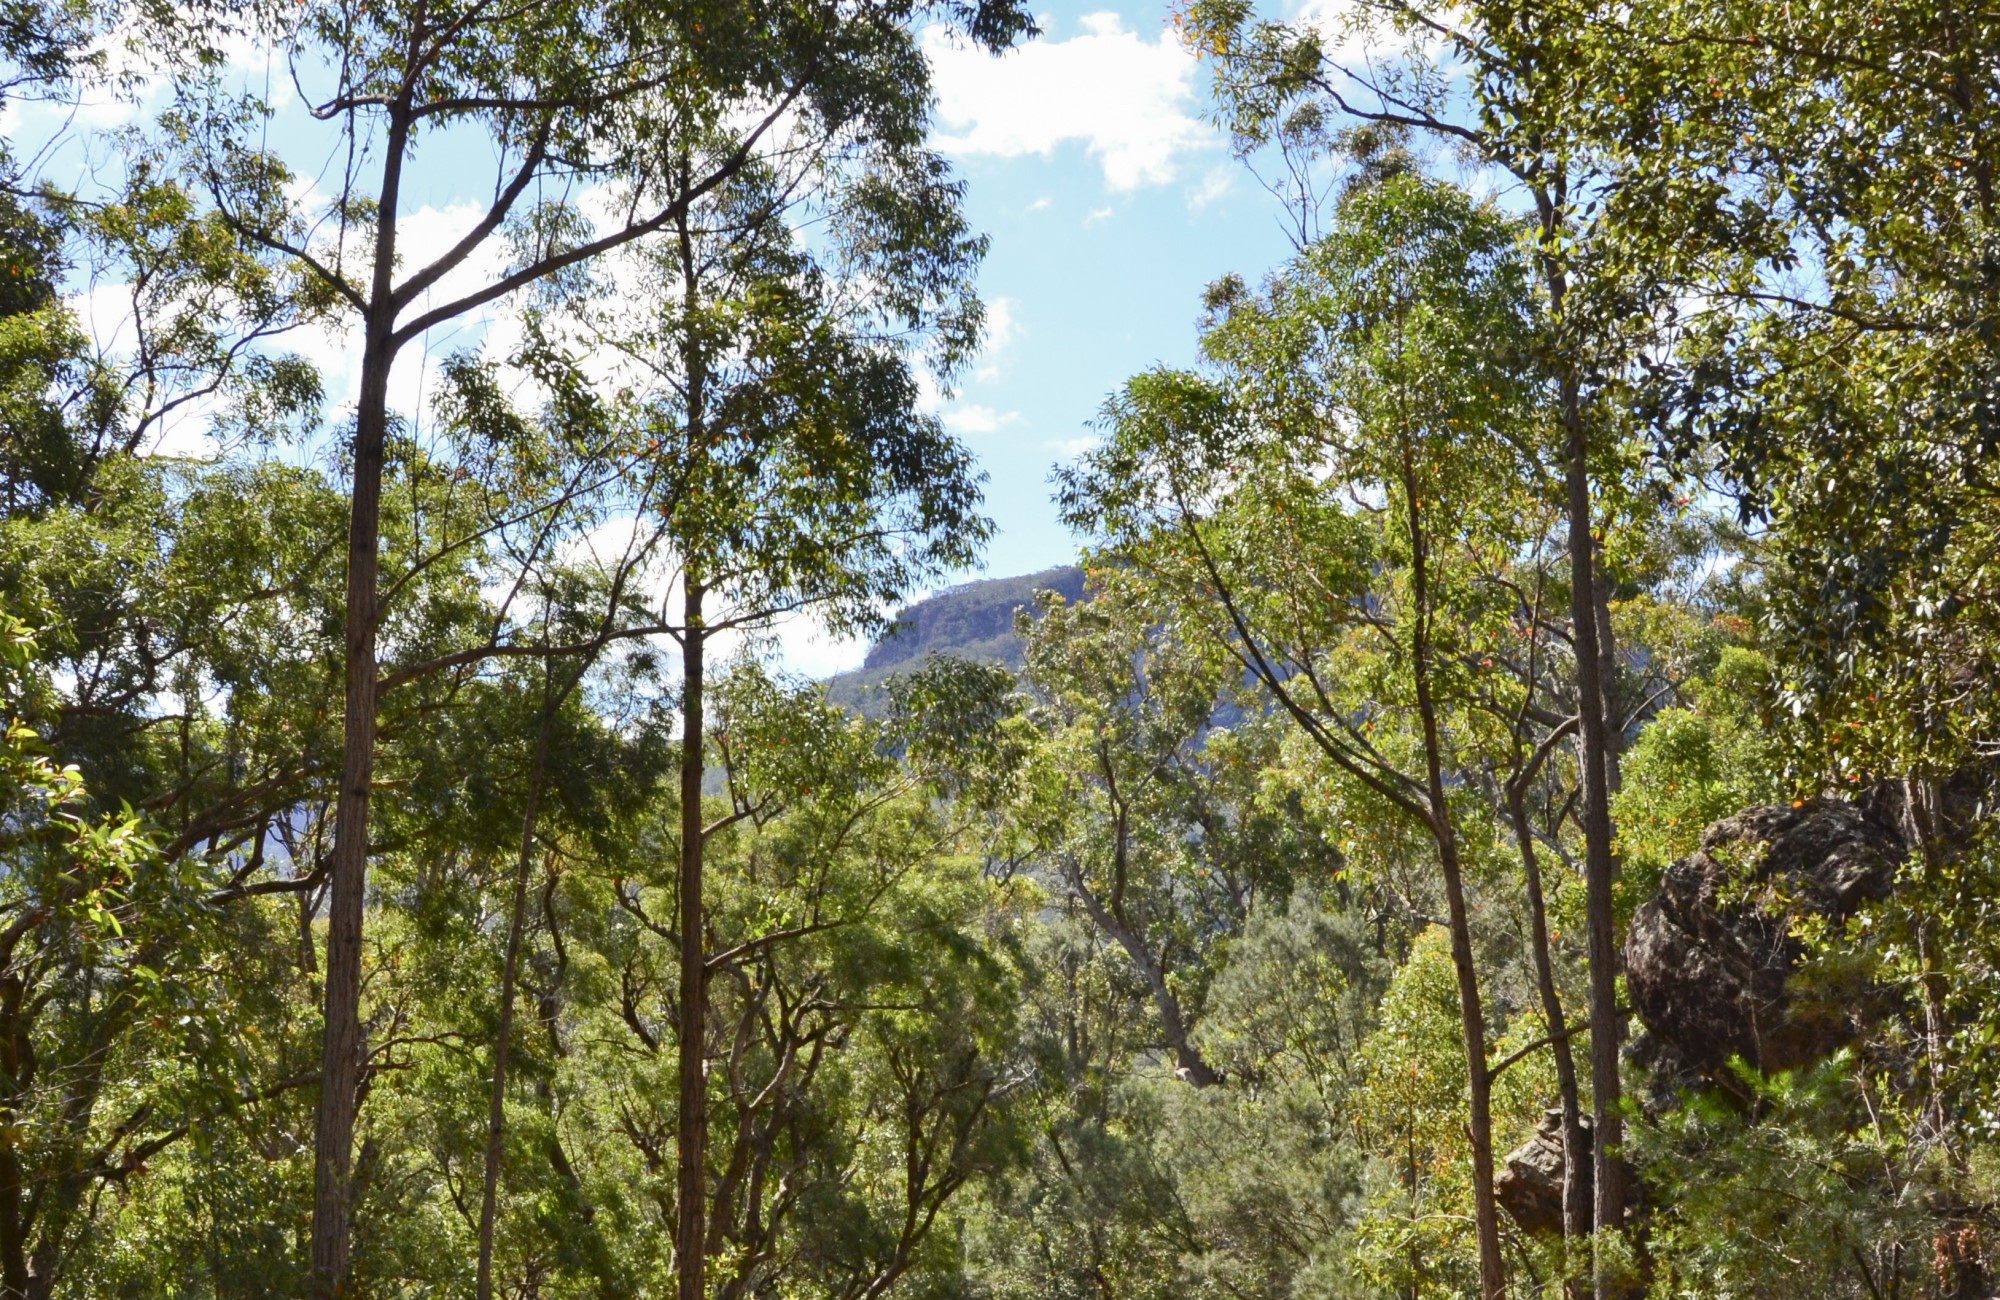 The trees and view along Griffins walking track in Morton National Park. Photo &copy; Jacqueline Devereaux